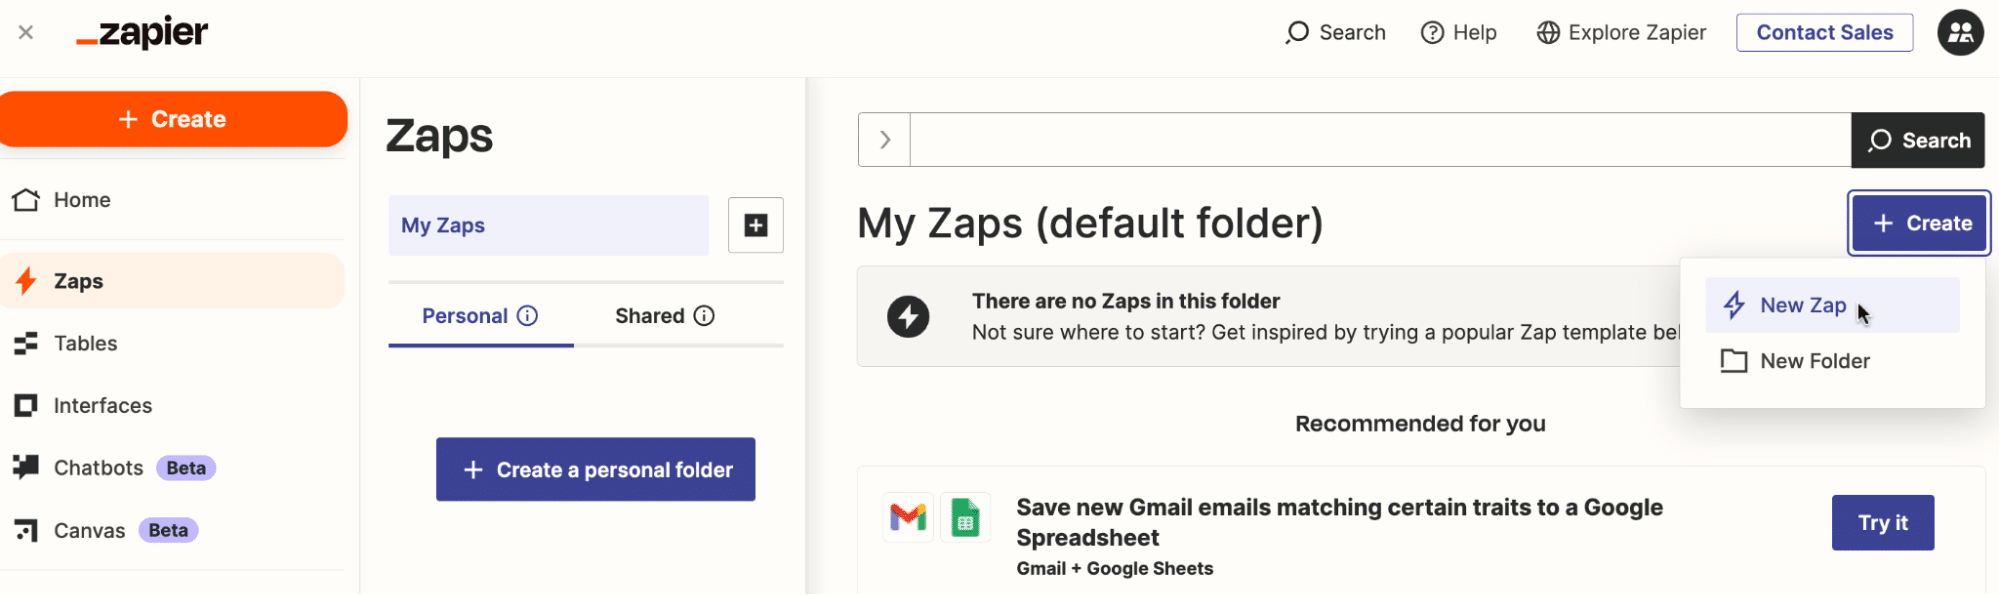 Initiating a new Zap creation in Zapier for Pipedrive and Excel integration